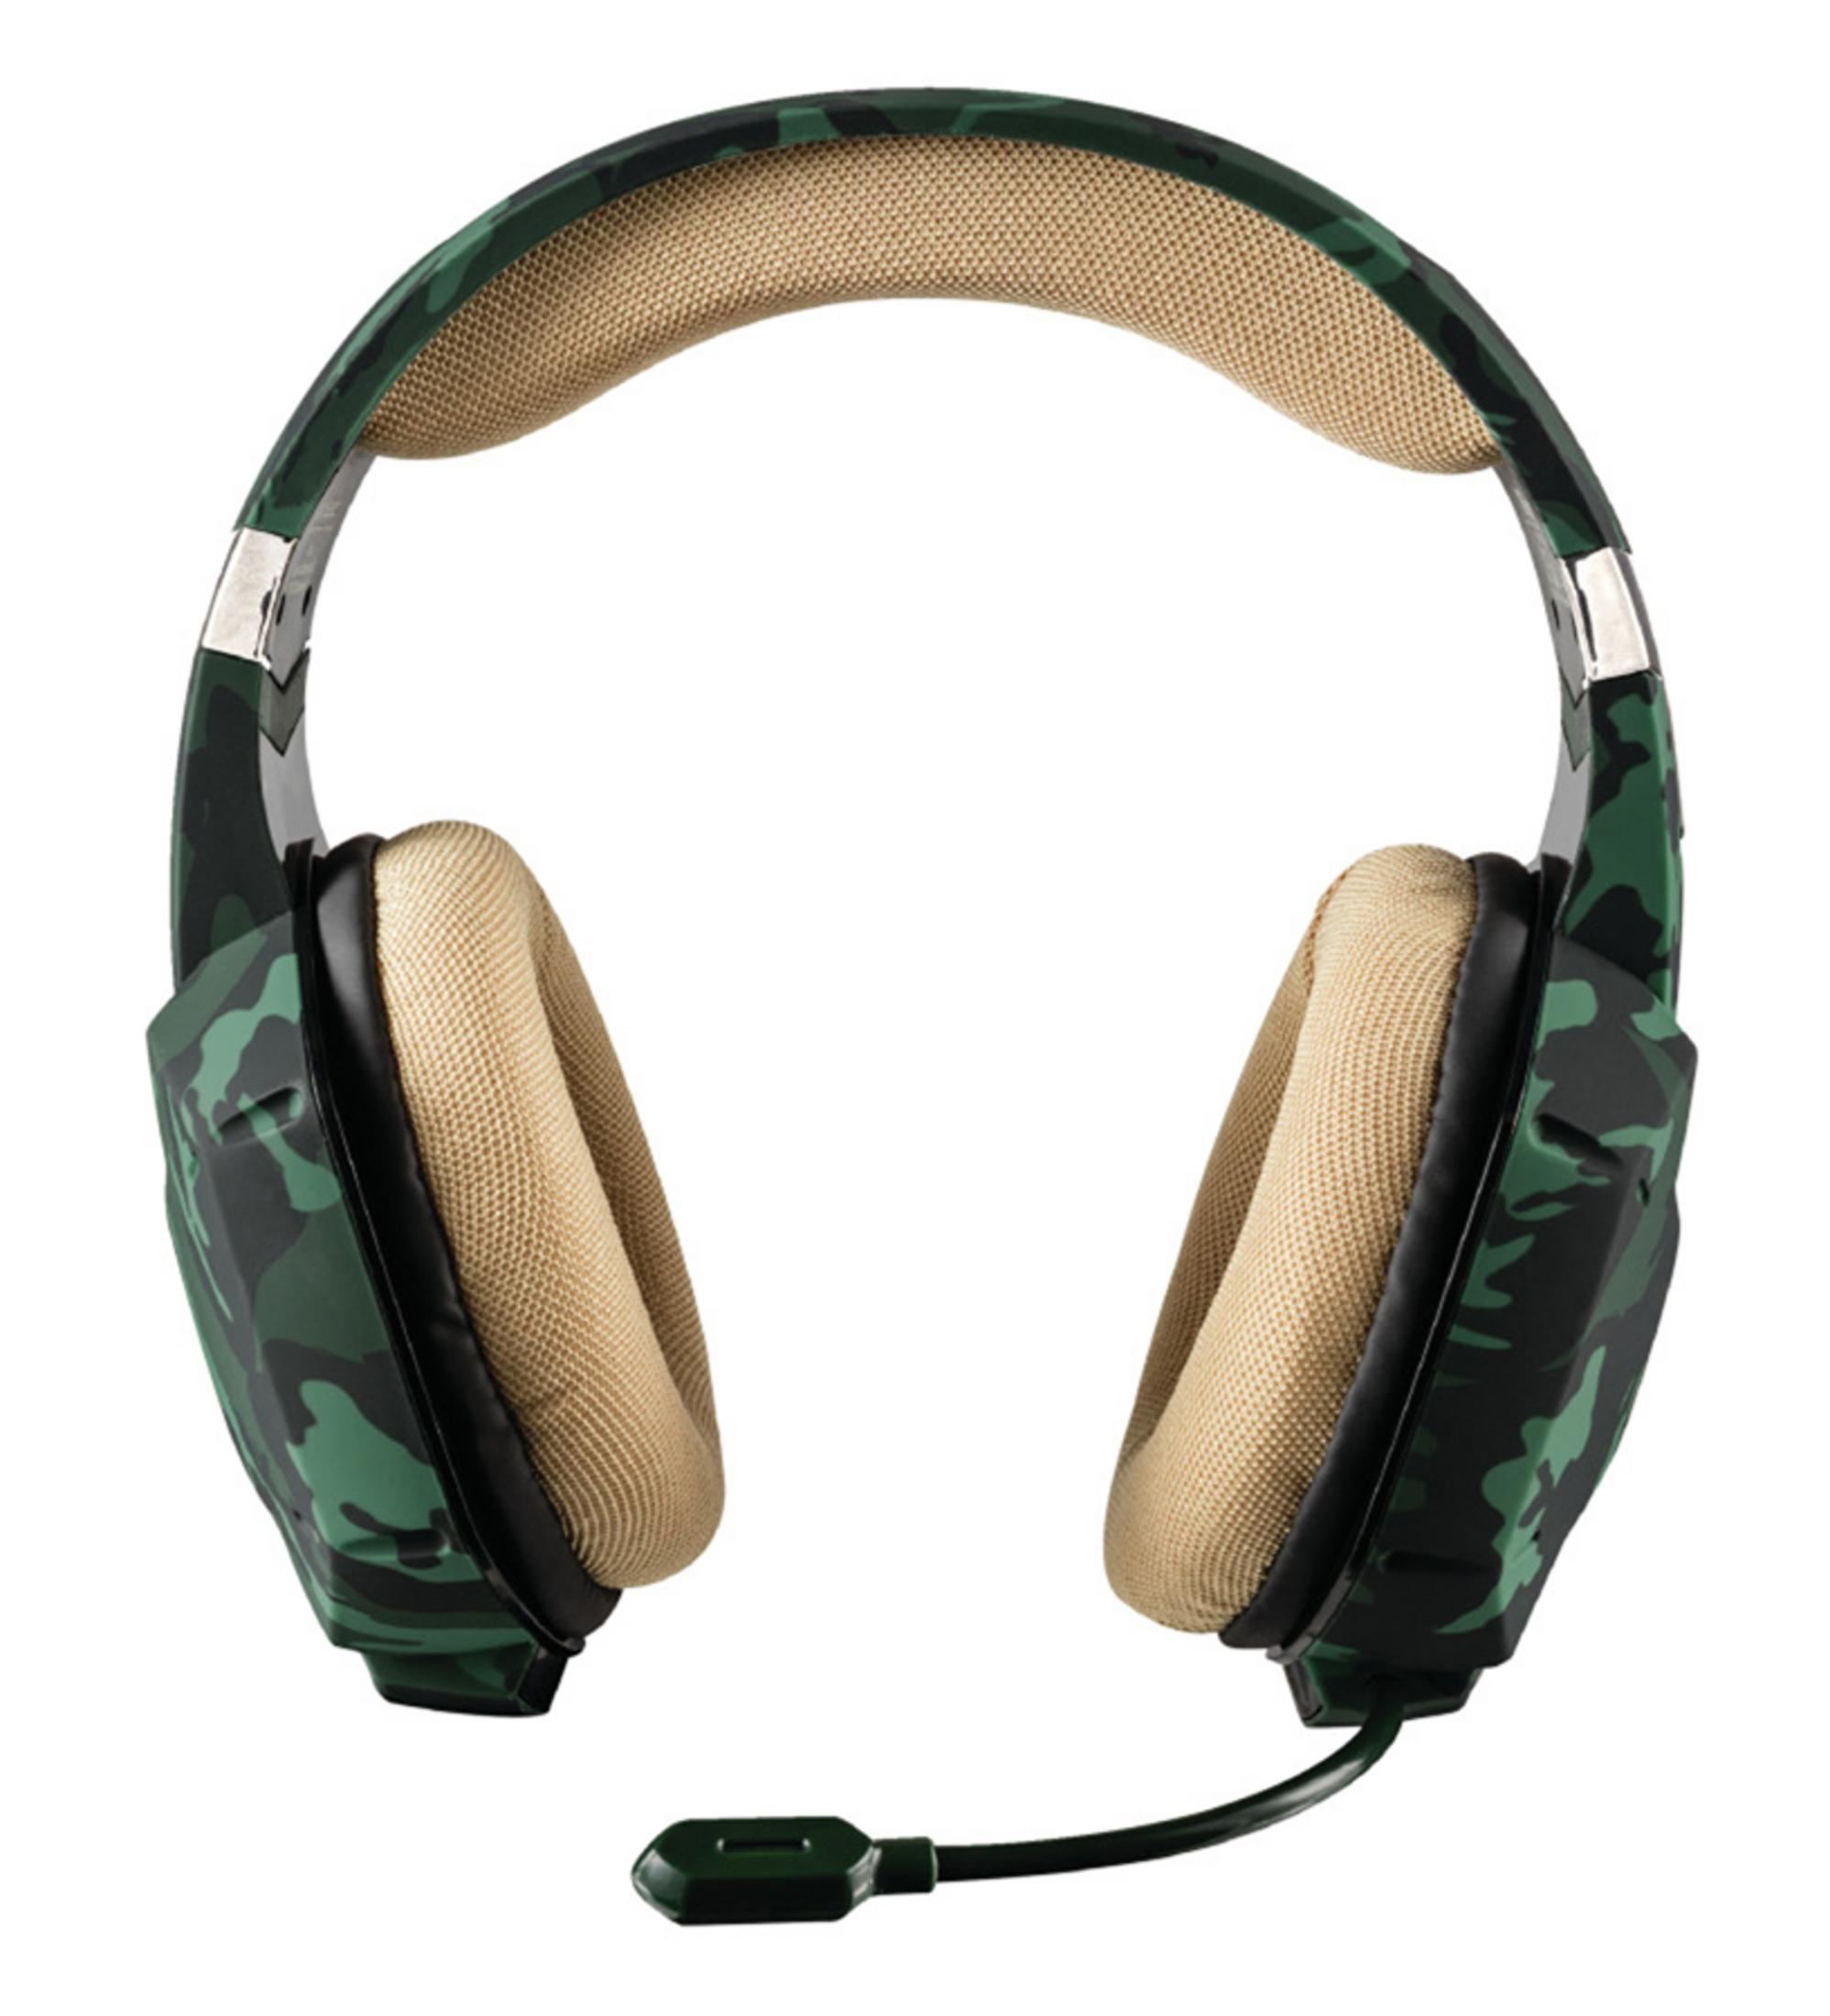 TRUST 20865 GXT GAMING GREEN CAMOUFLAGE, In-ear HEADSET Grün/Camouflage Gaming 322C Headset